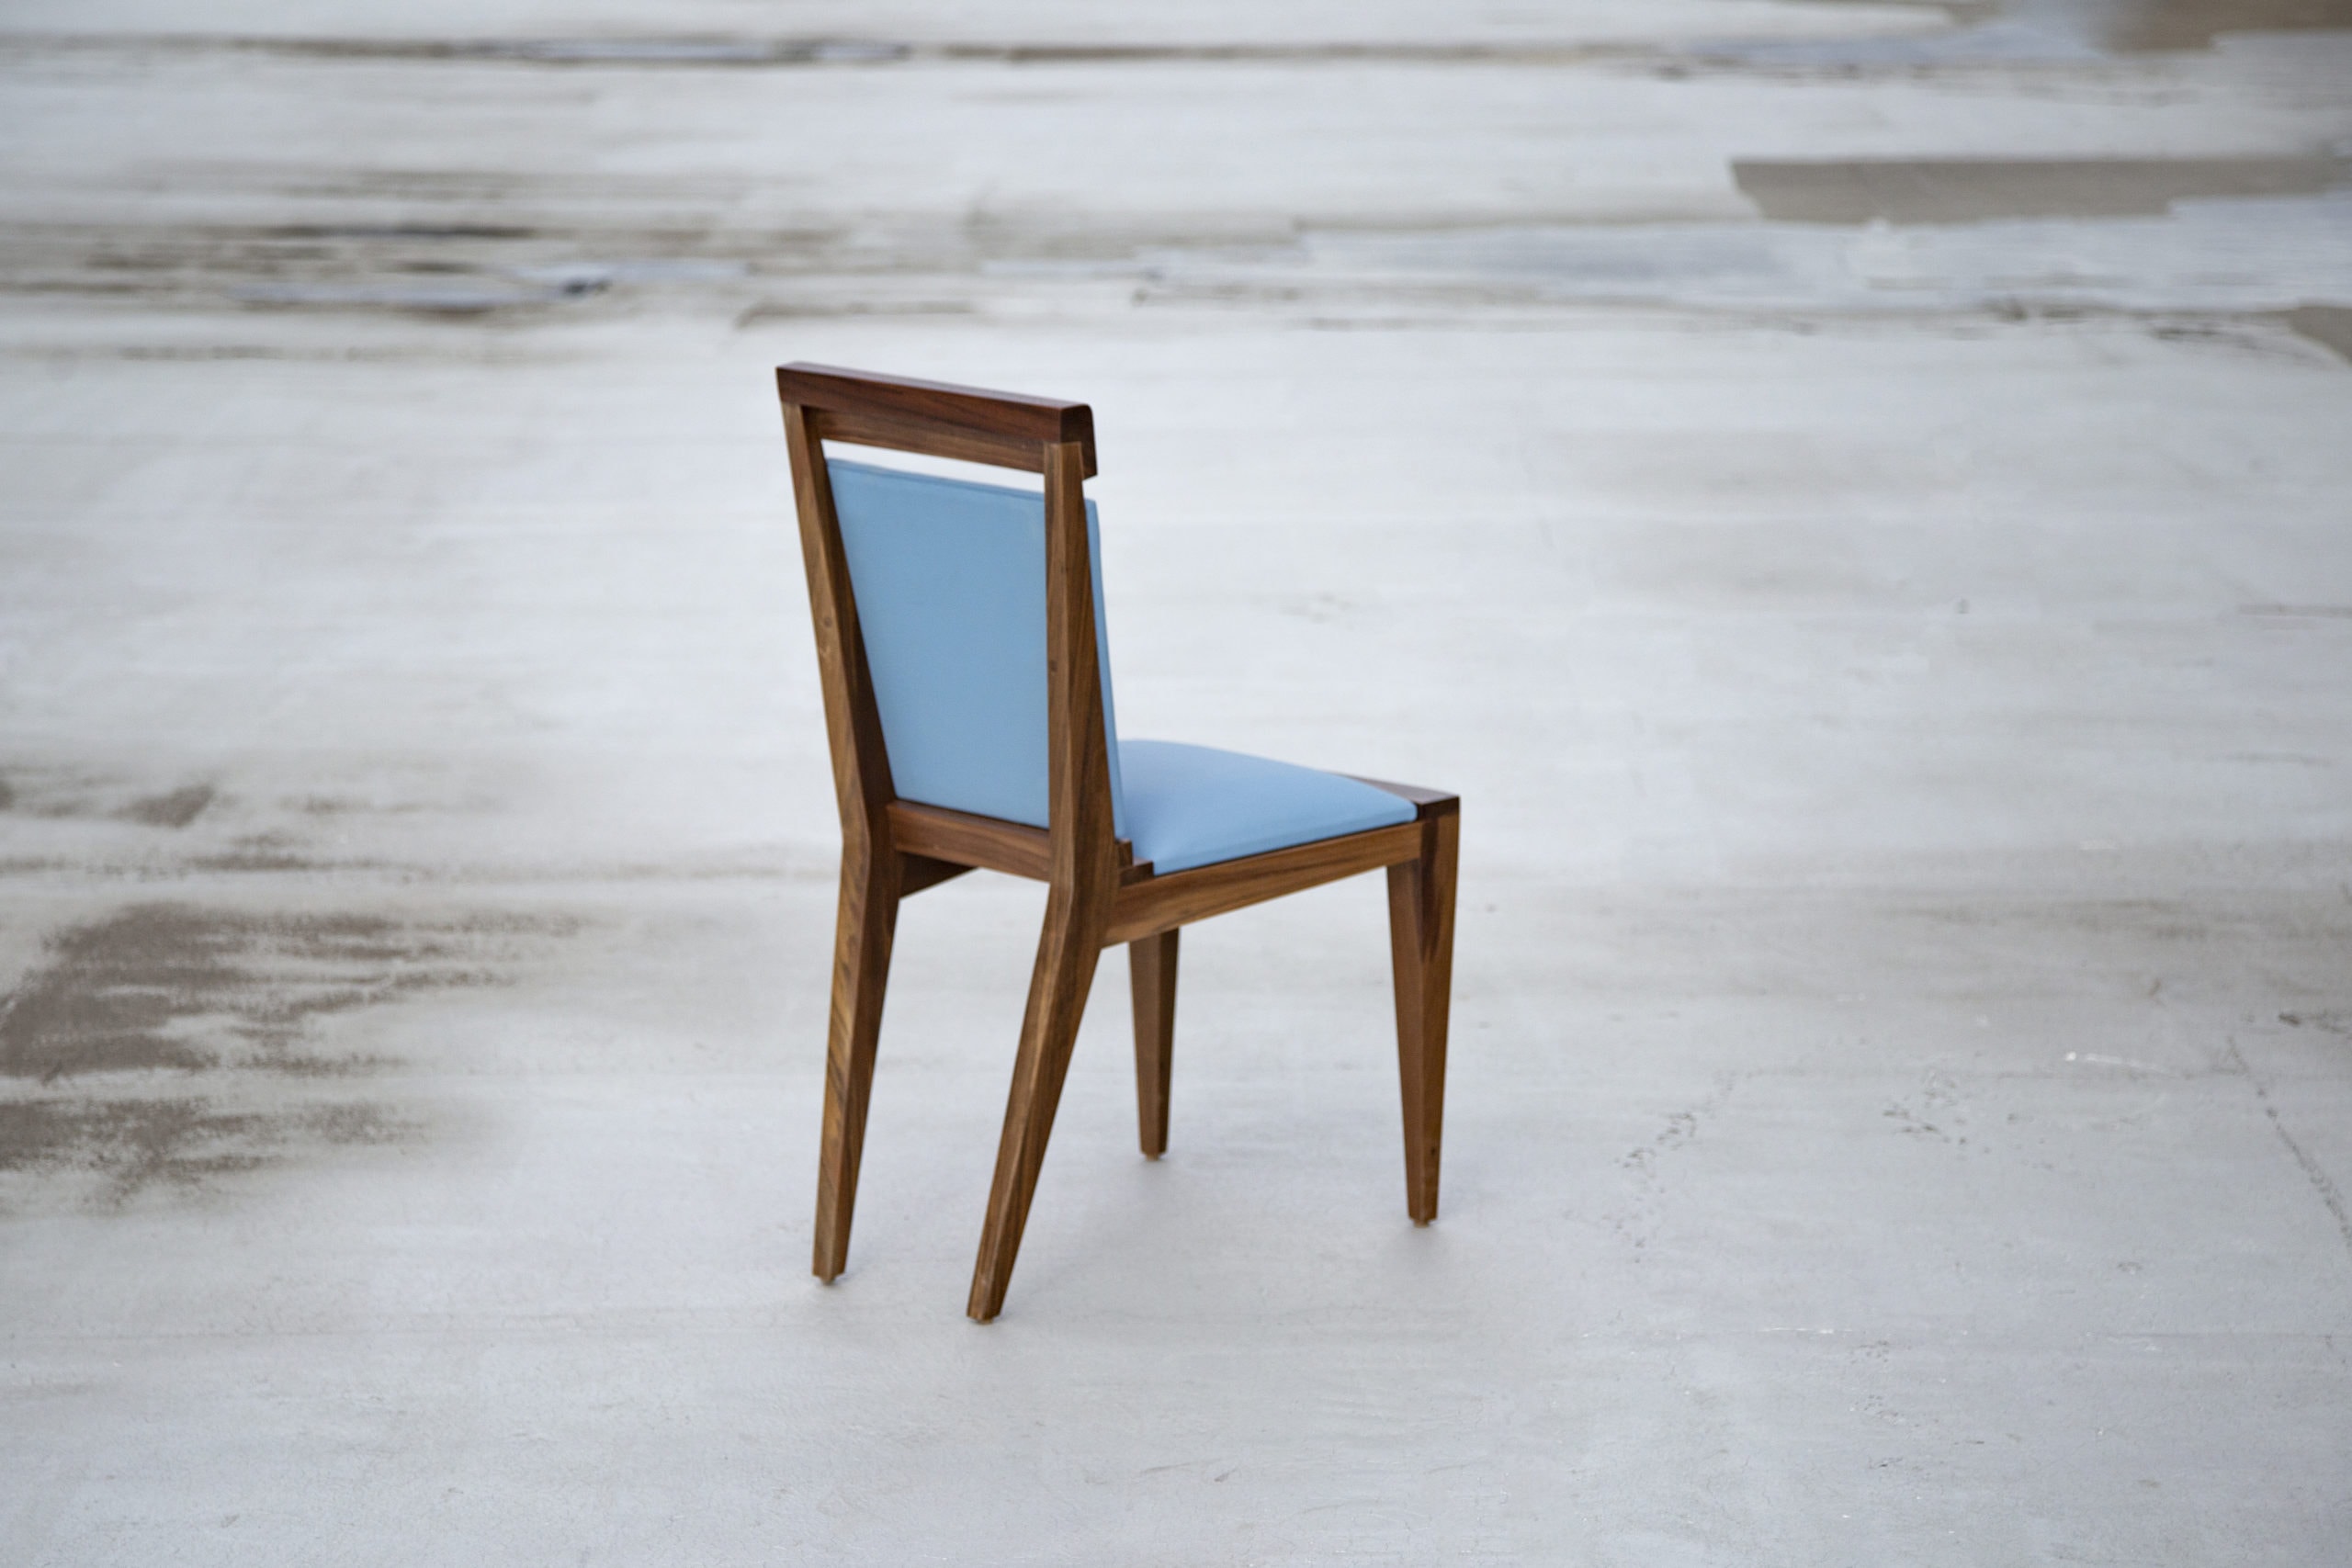 SENTIENT contemporary designed Angles dining chair in walnut with custom light blue leather upholstery, back view with grey background